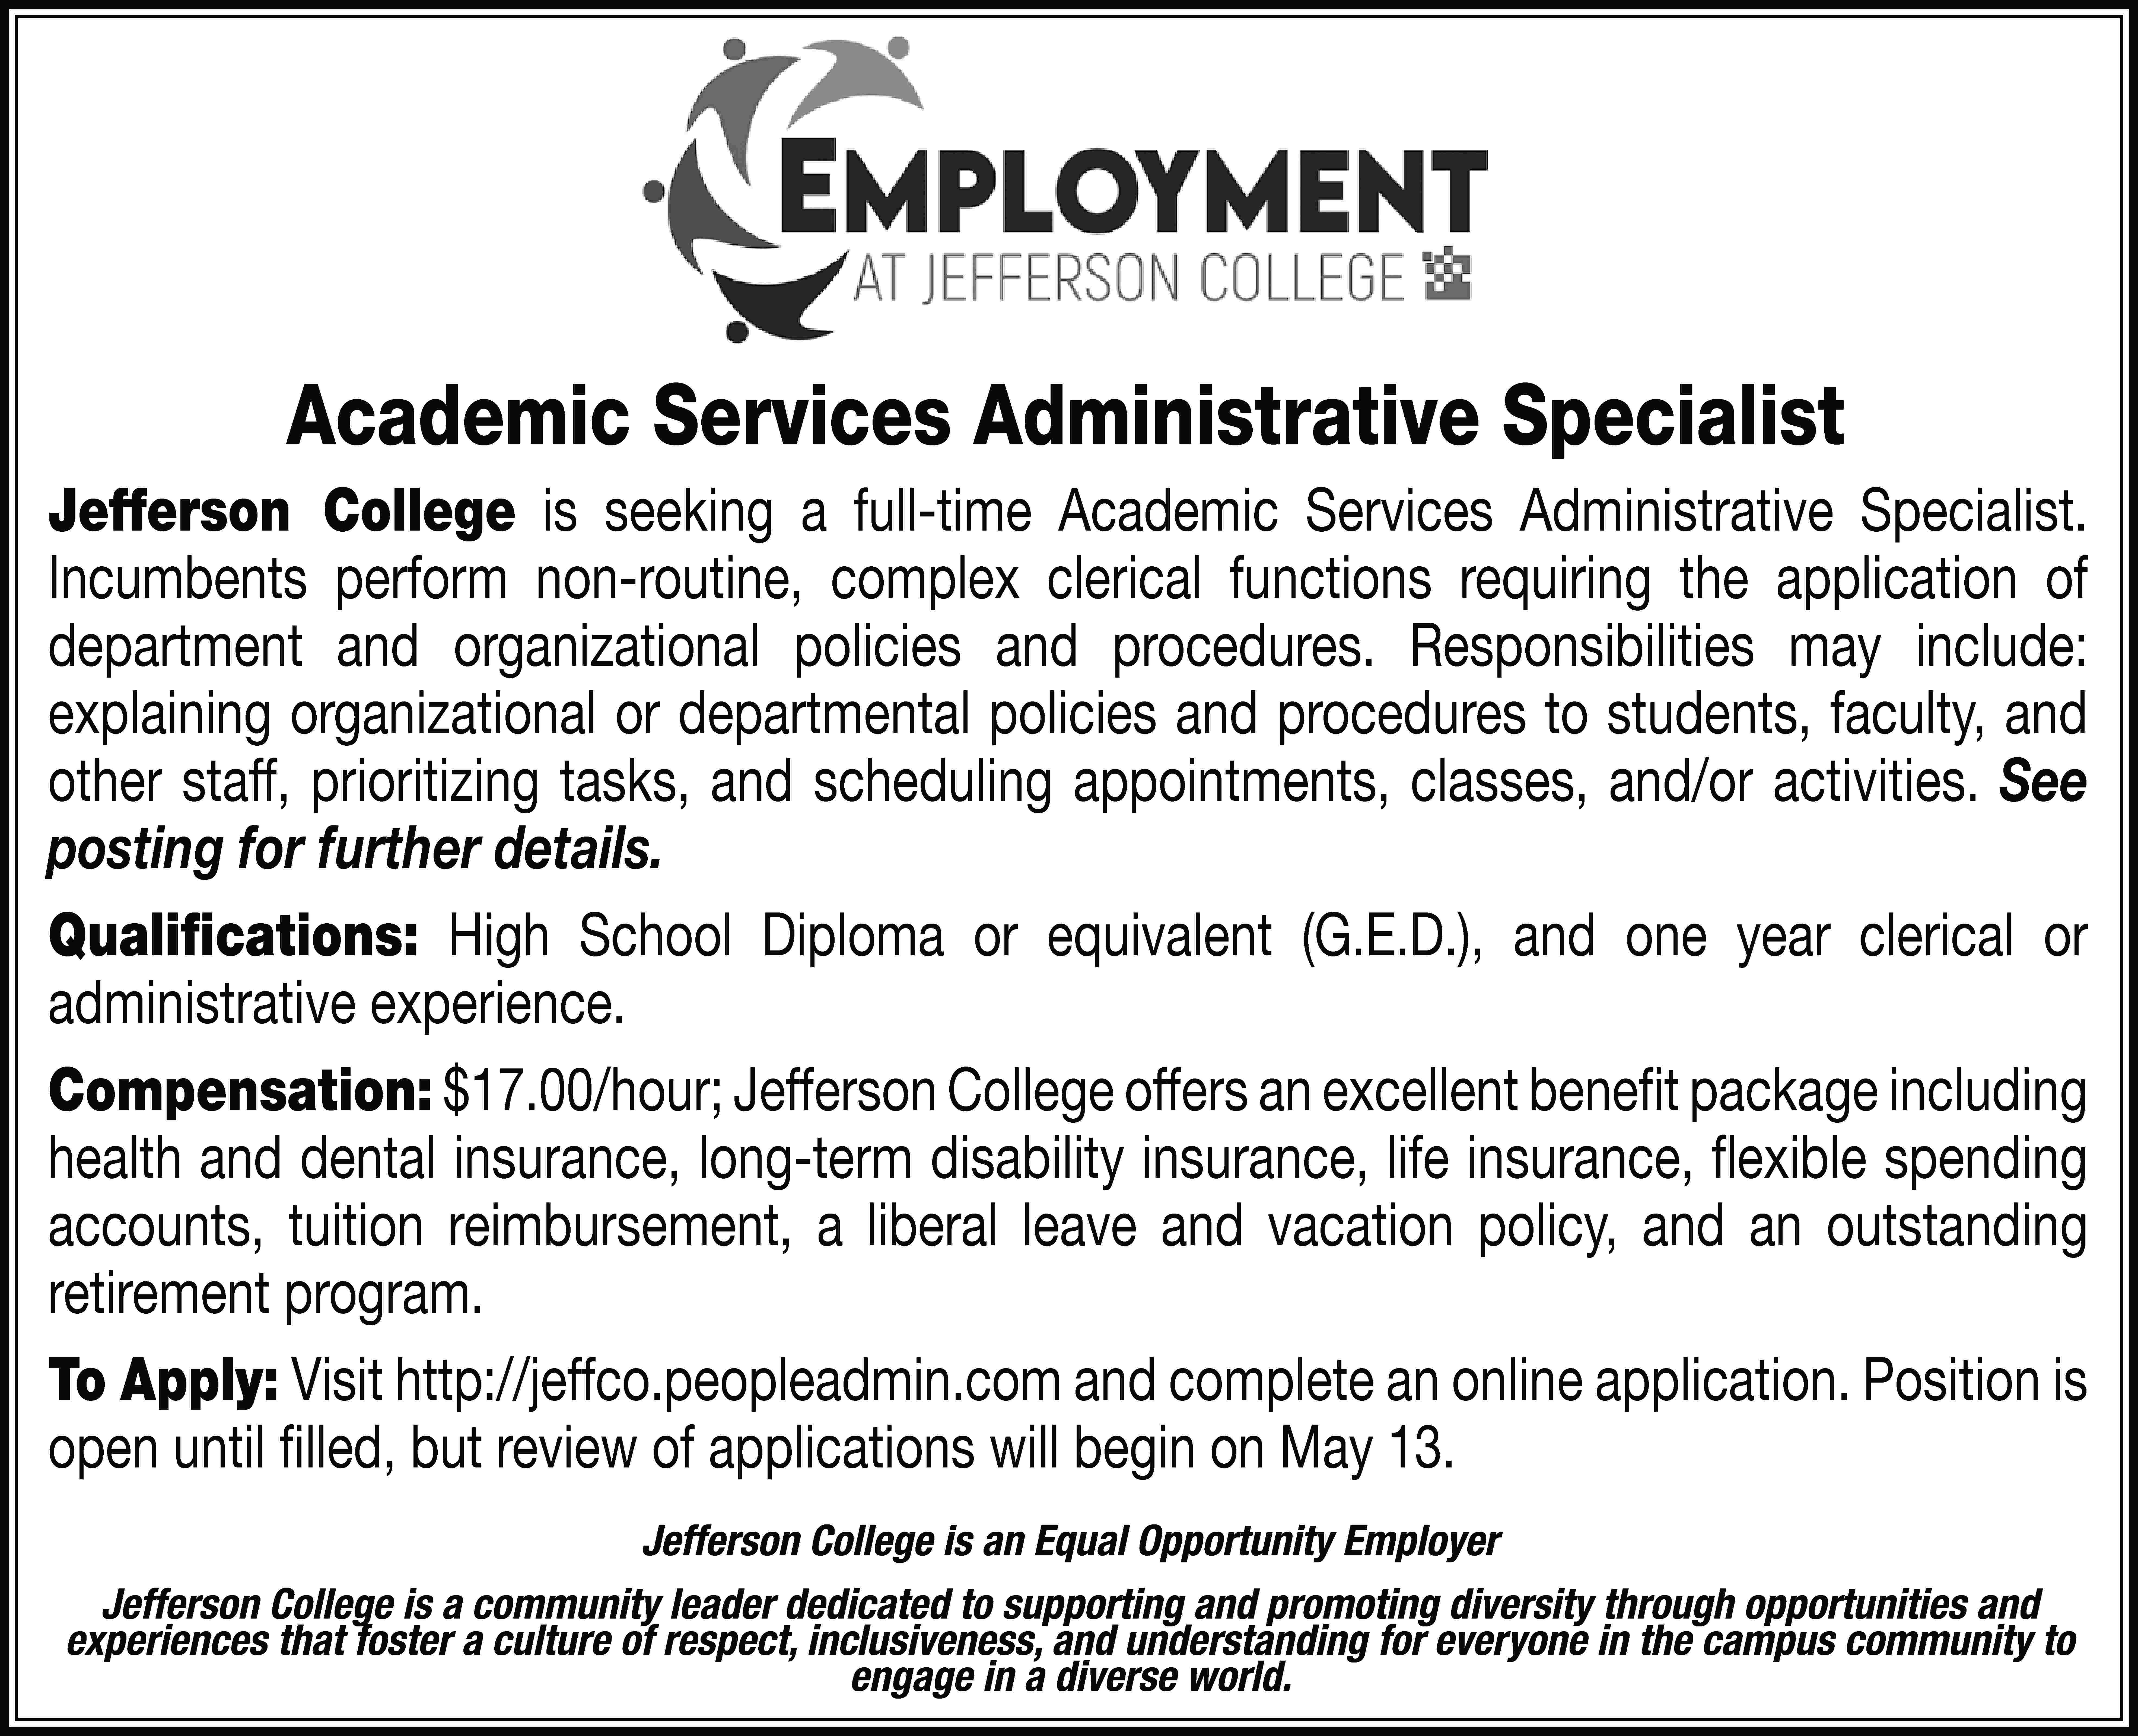 Academic Services Administrative Specialist Jefferson  Academic Services Administrative Specialist Jefferson College is seeking a full-time Academic Services Administrative Specialist. Incumbents perform non-routine, complex clerical functions requiring the application of department and organizational policies and procedures. Responsibilities may include: explaining organizational or departmental policies and procedures to students, faculty, and other staff, prioritizing tasks, and scheduling appointments, classes, and/or activities. See posting for further details. Qualifications: High School Diploma or equivalent (G.E.D.), and one year clerical or administrative experience. Compensation: $17.00/hour; Jefferson College offers an excellent benefit package including health and dental insurance, long-term disability insurance, life insurance, flexible spending accounts, tuition reimbursement, a liberal leave and vacation policy, and an outstanding retirement program. To Apply: Visit http://jeffco.peopleadmin.com and complete an online application. Position is open until filled, but review of applications will begin on May 13. Jefferson College is an Equal Opportunity Employer Jefferson College is a community leader dedicated to supporting and promoting diversity through opportunities and experiences that foster a culture of respect, inclusiveness, and understanding for everyone in the campus community to engage in a diverse world.